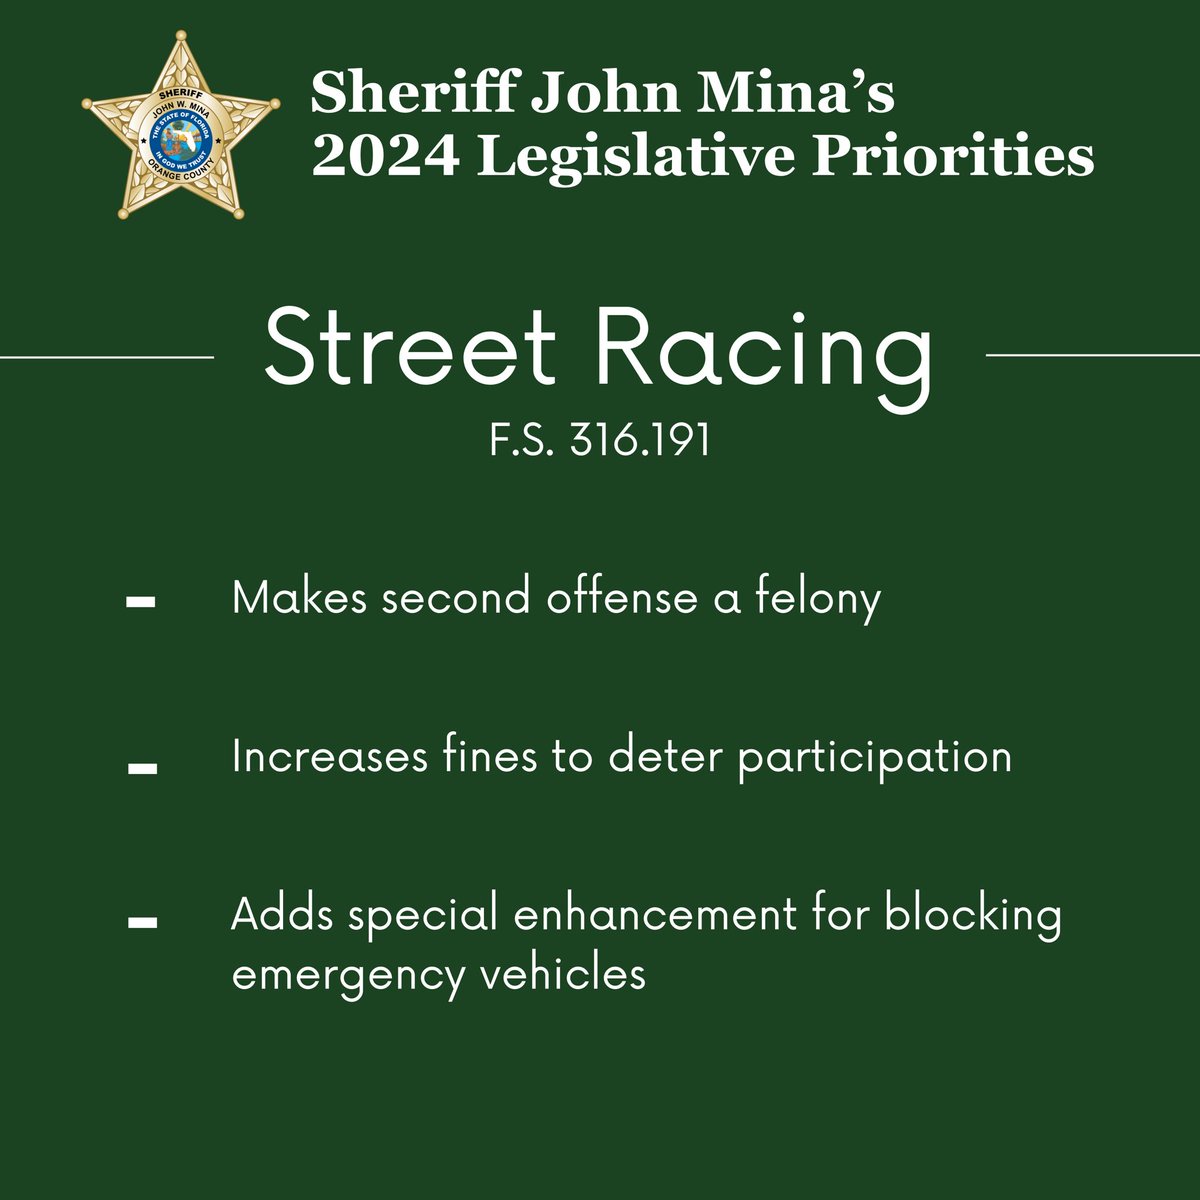 We are thrilled that this street racing bill has been signed into law! #StreetRacing is a dangerous problem in Orange County and across the state, which is why one of @SheriffMina’s 2024 Legislative priorities was to beef up Florida law to make a second offense a felony & add…